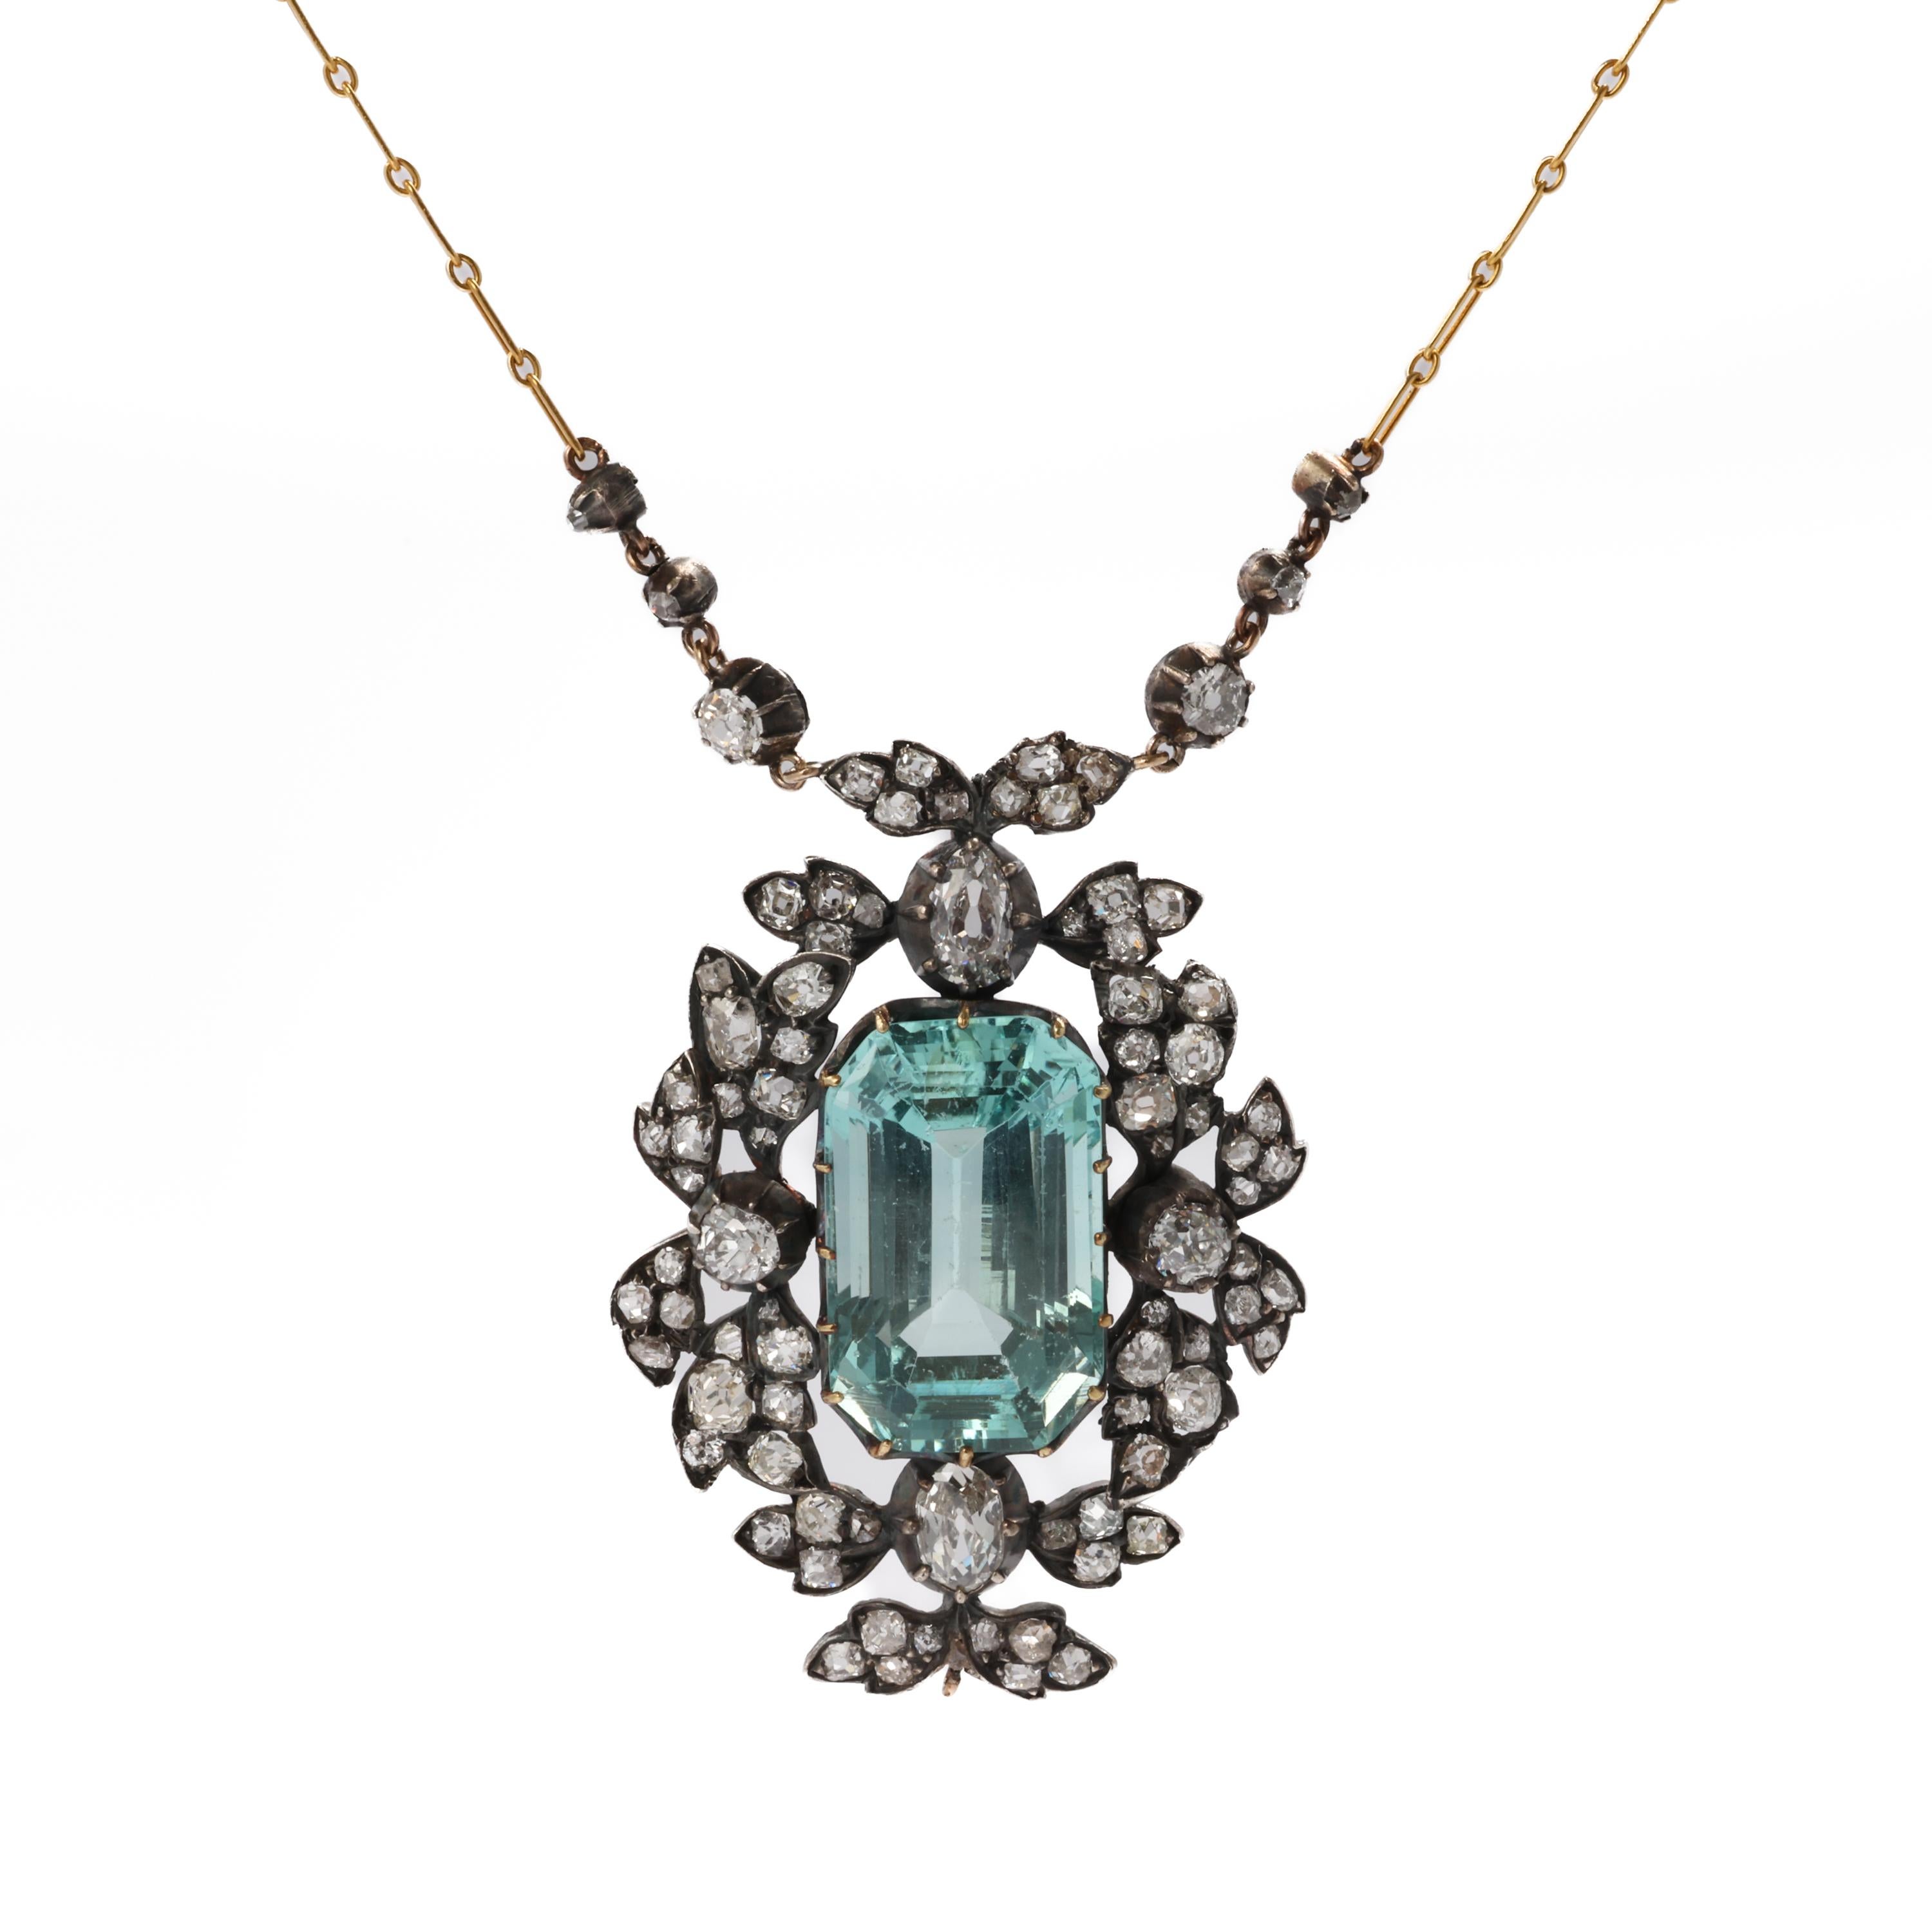 This ravishing antique aquamarine necklace dates to the Regency period (1811-1820). This crowning jewel from the era features an exquisite and huge emerald-cut aquamarine of the most sublime light blue. This glorious gem is set within a foliate